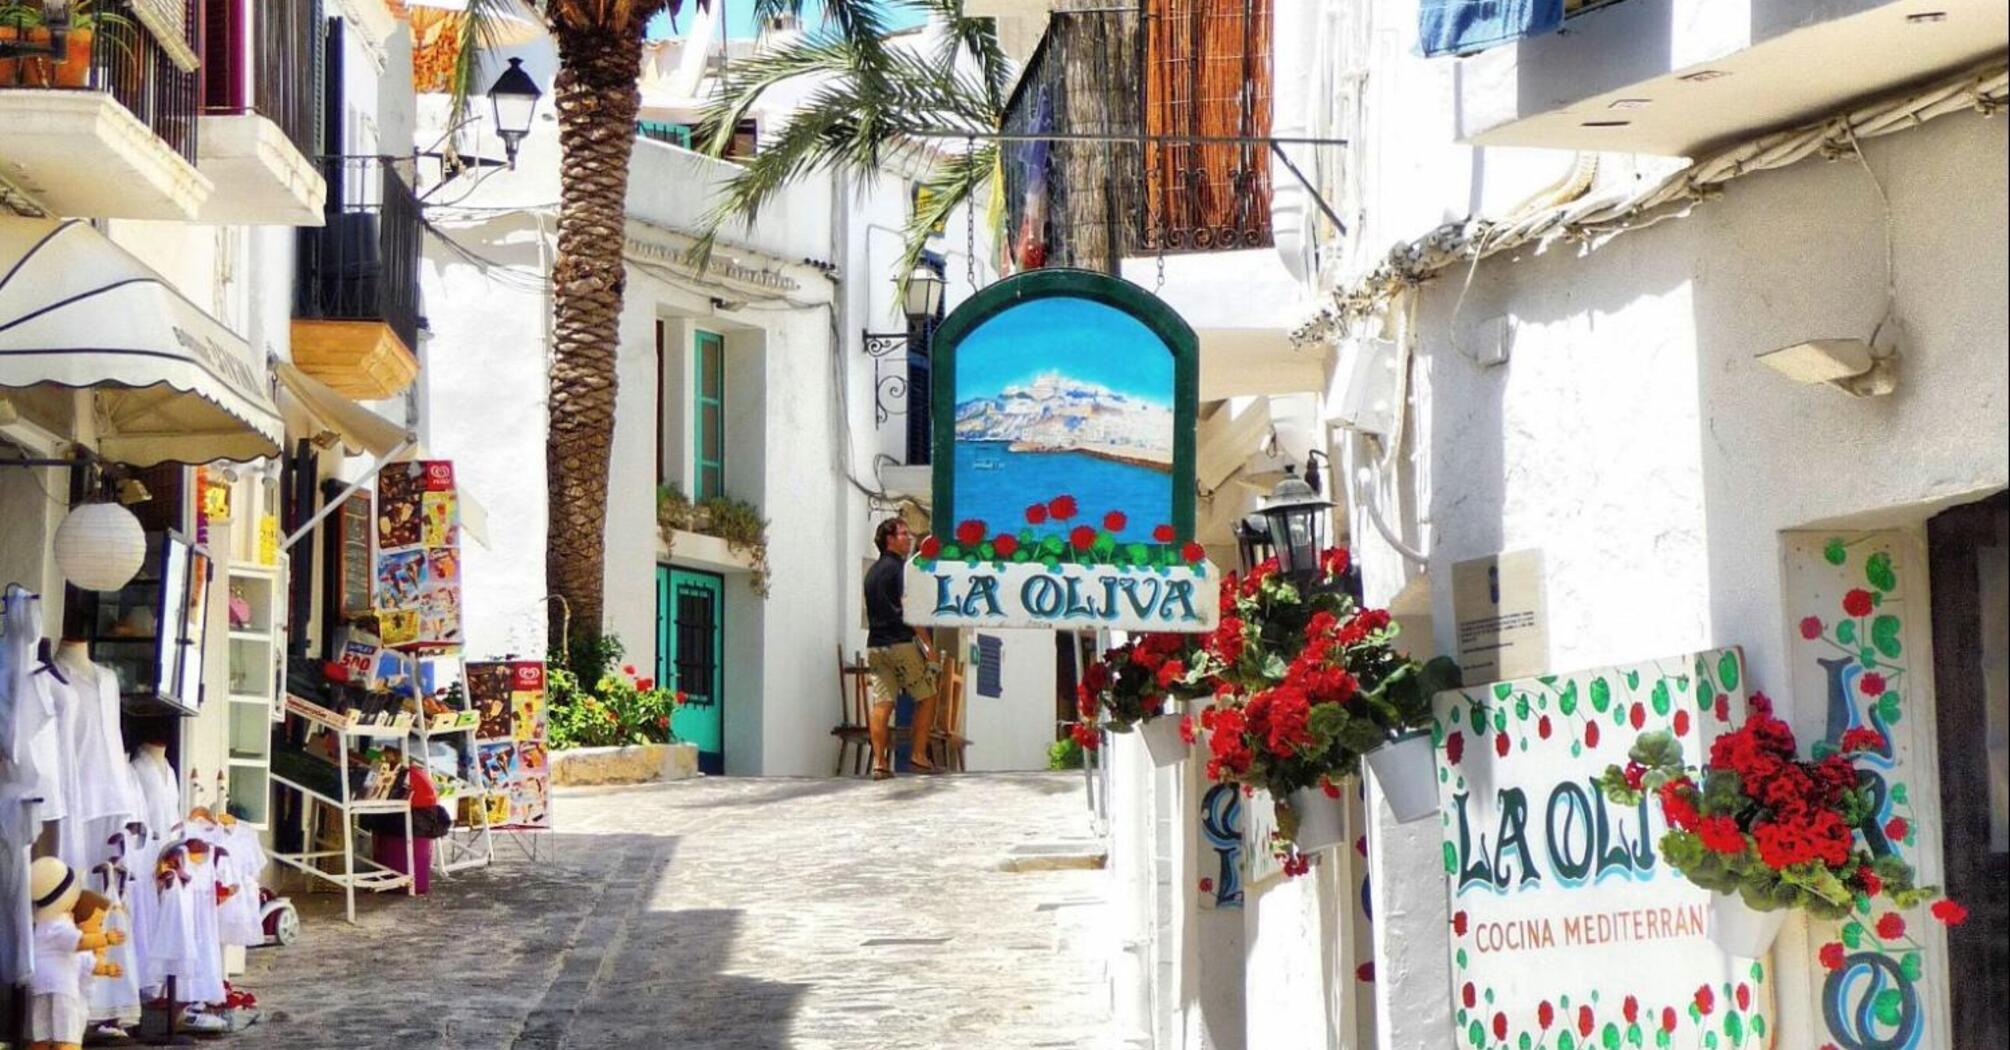 Charming narrow street in Ibiza with whitewashed buildings, colorful storefronts, and vibrant flowers